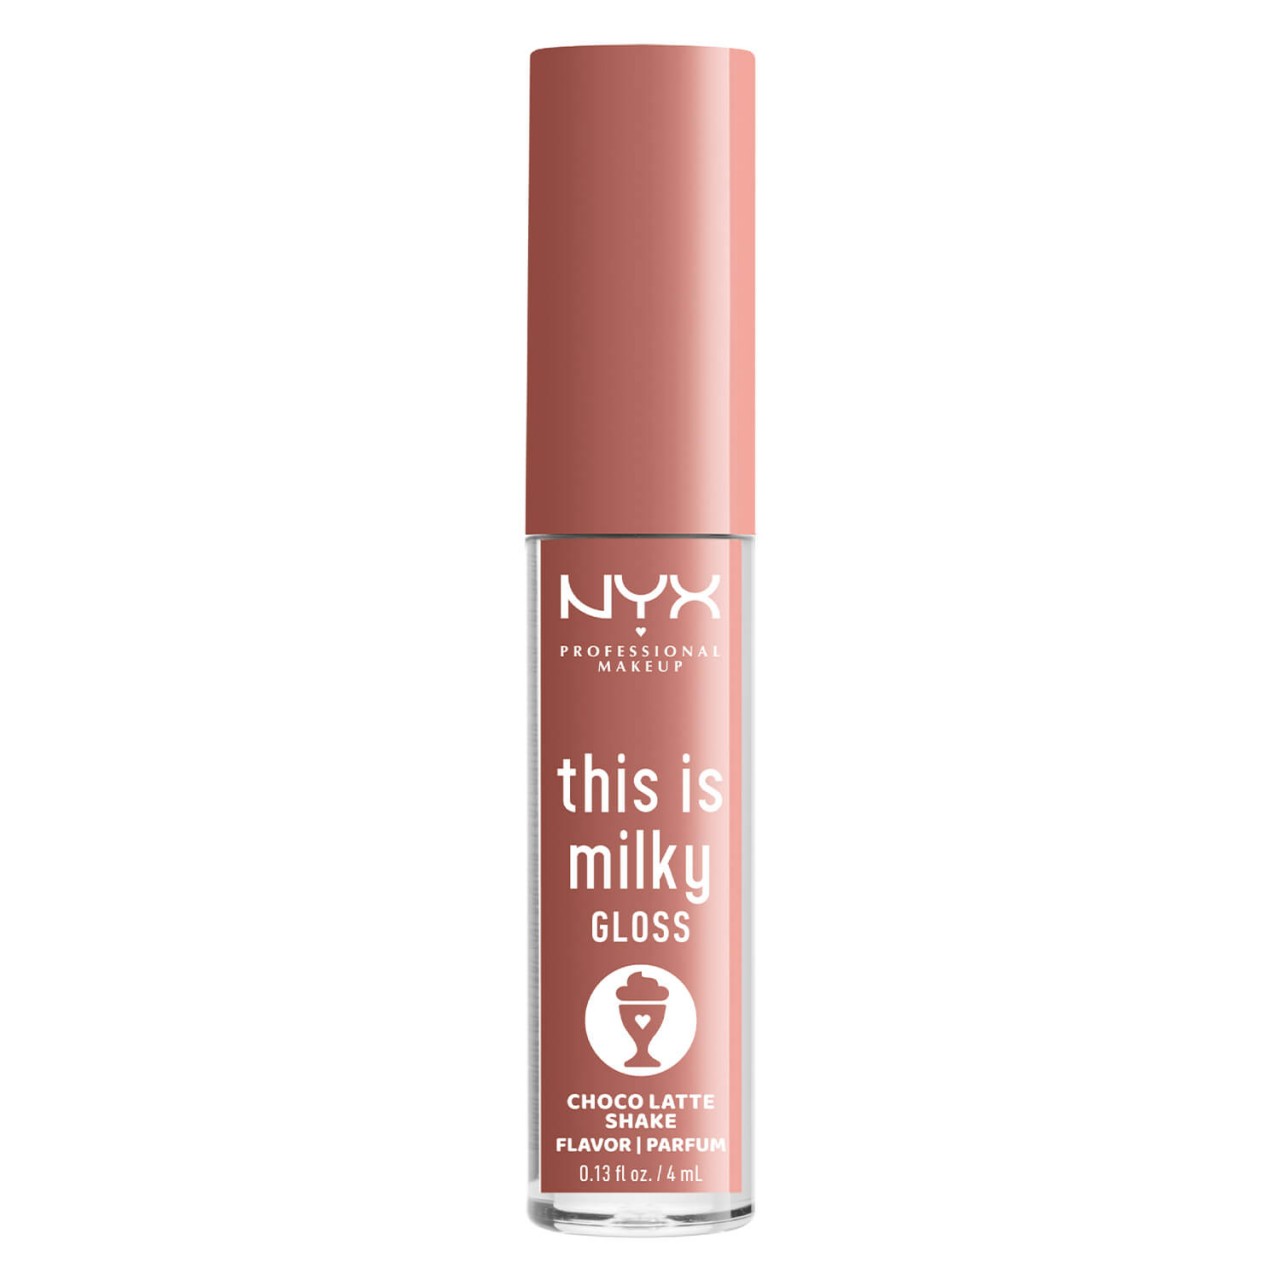 This Is Milky Gloss - Choco Latte Shake von NYX Professional Makeup